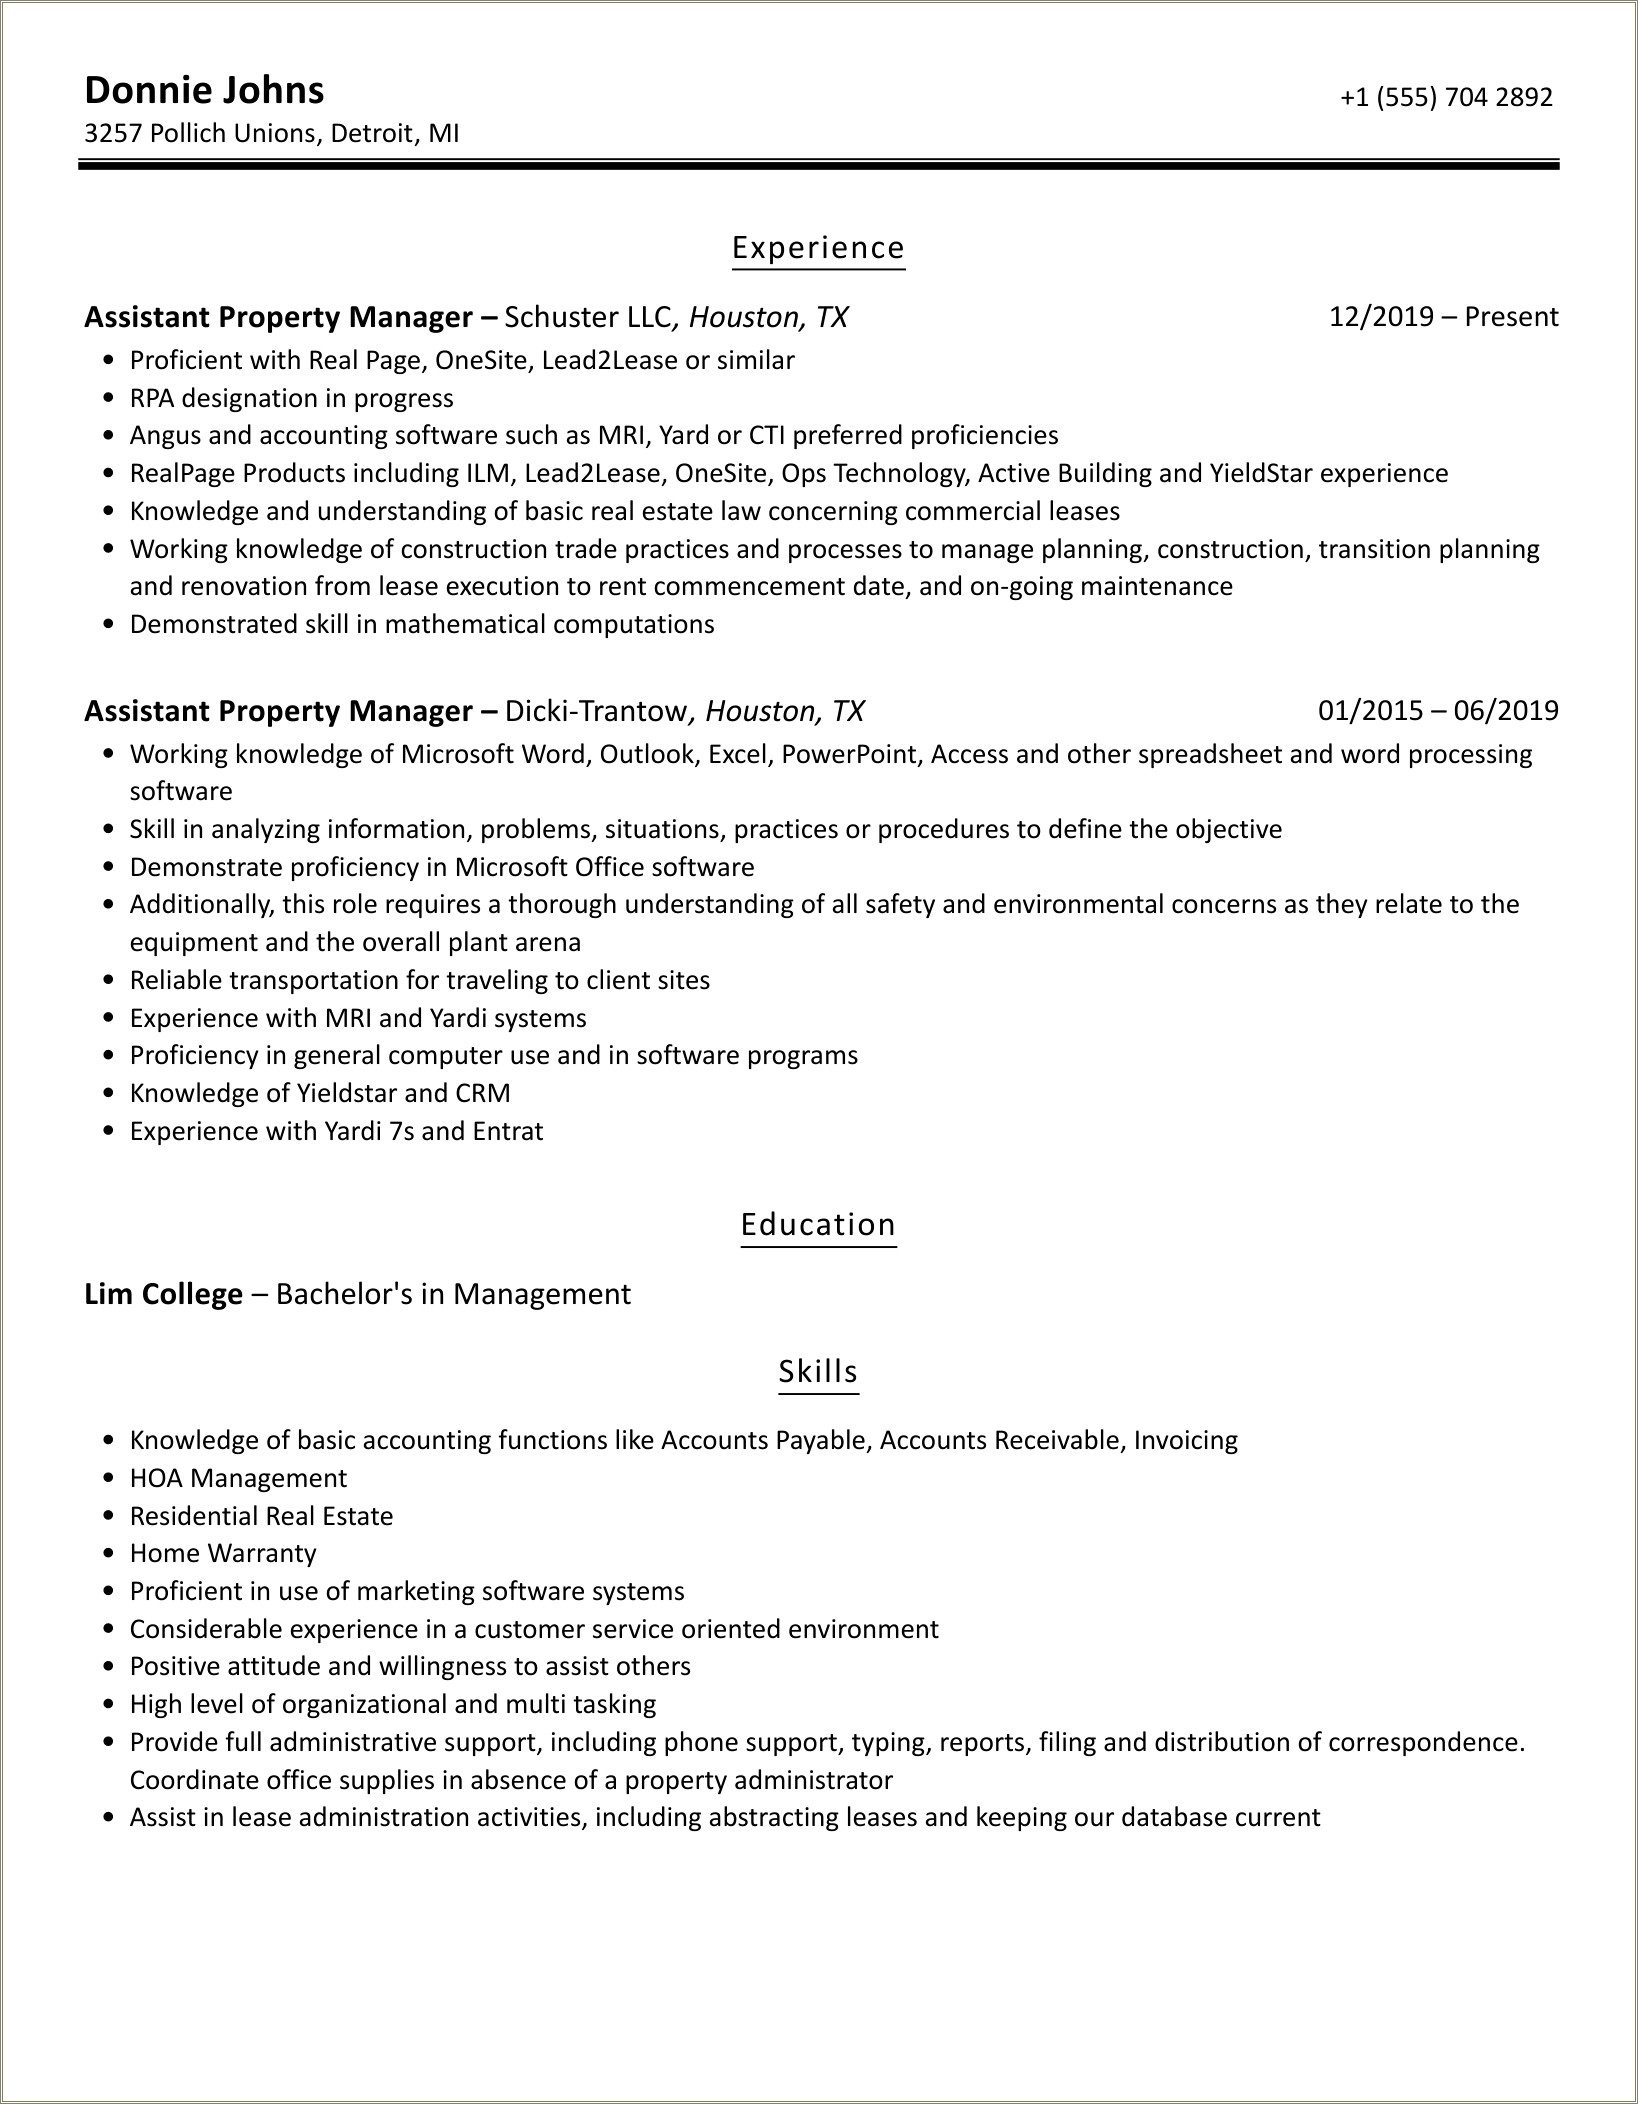 Objective For Resume For Assistant Propety Manager